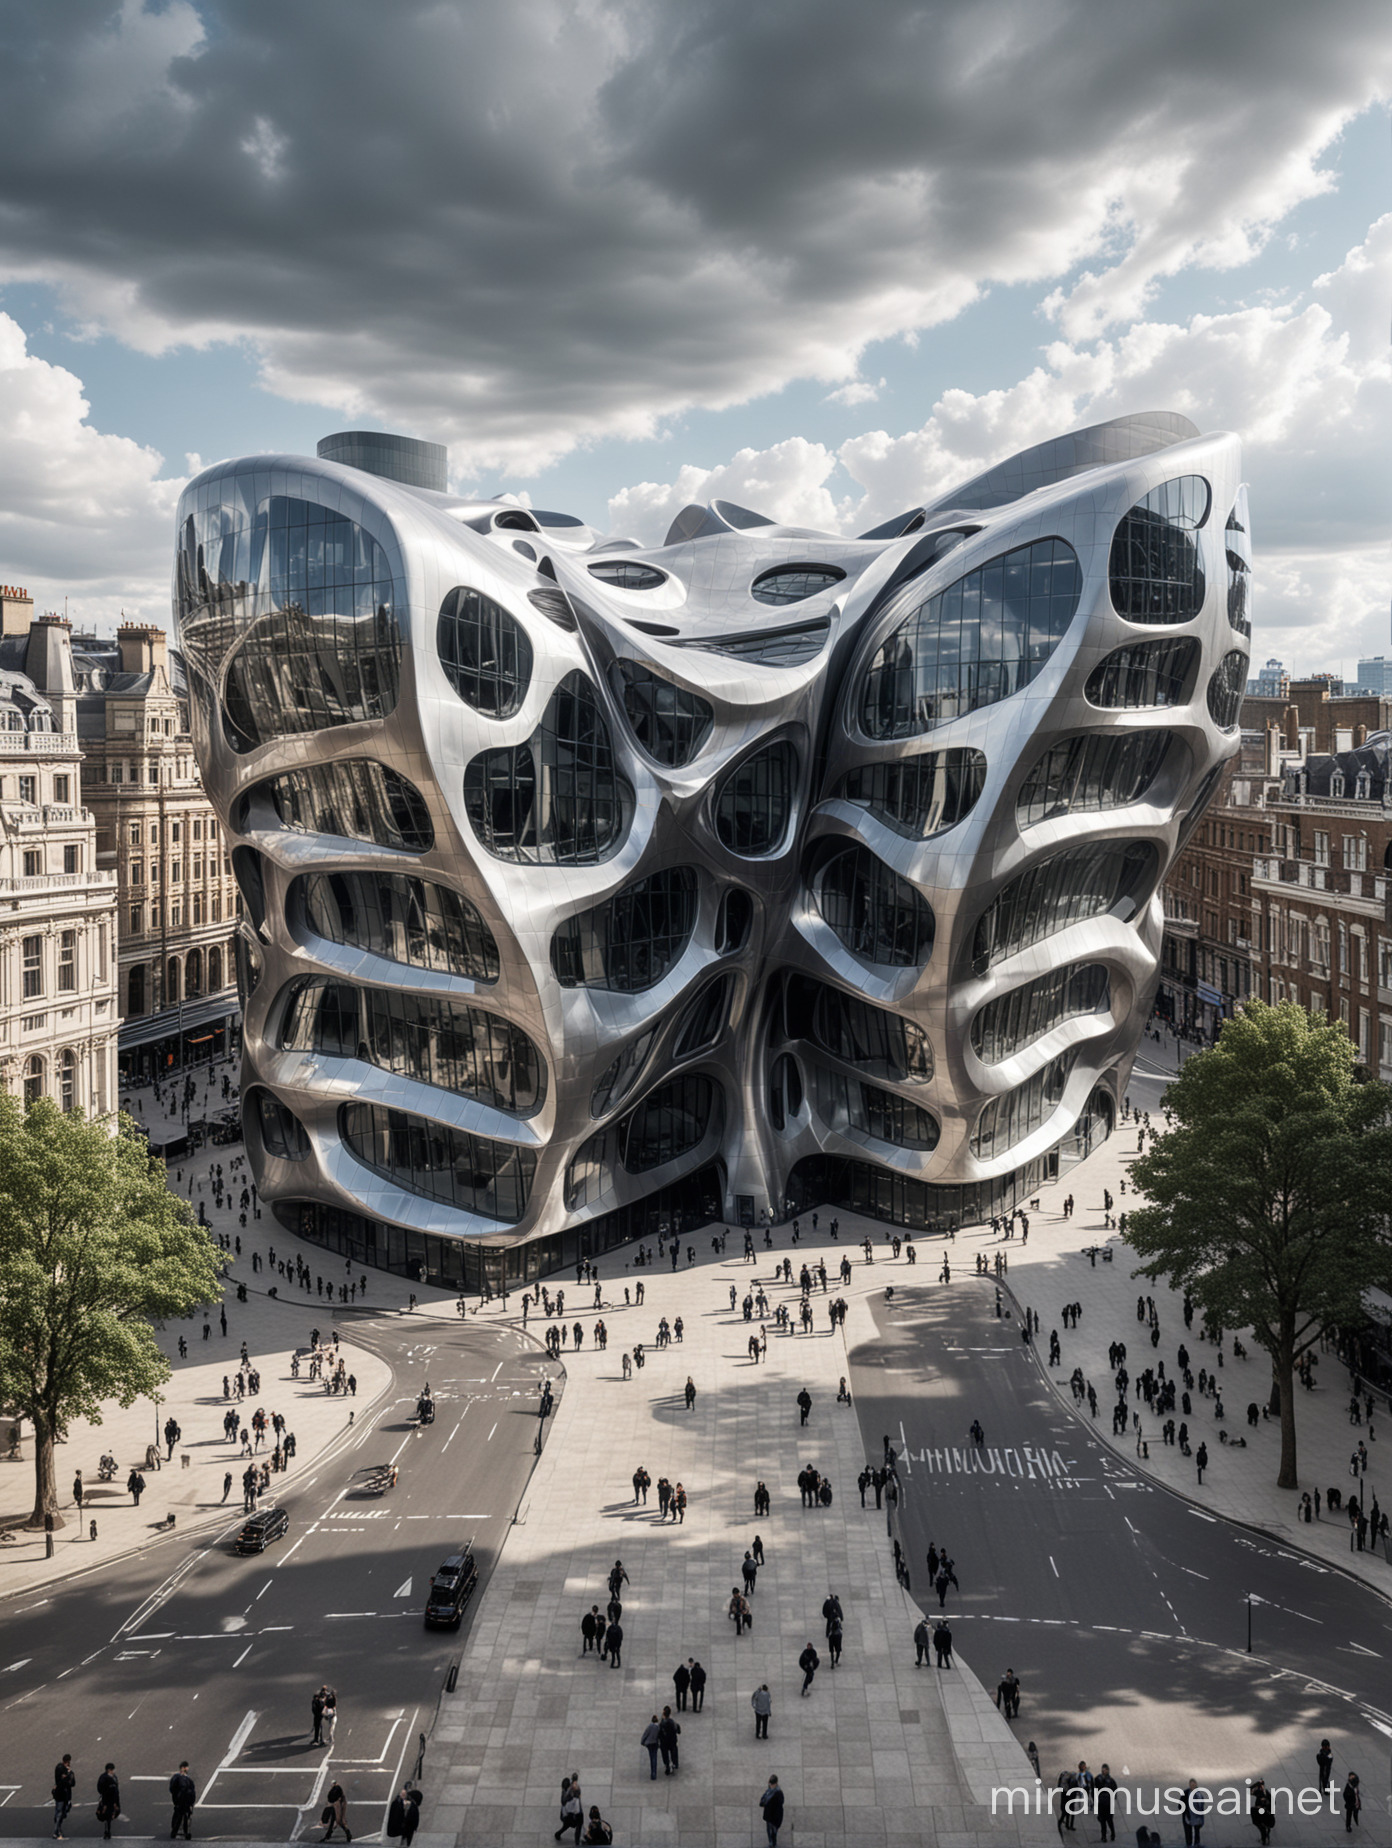 Modern Architectures at Londons Square Zaha Hadid and Frank Gehry Style in Liquid Silver